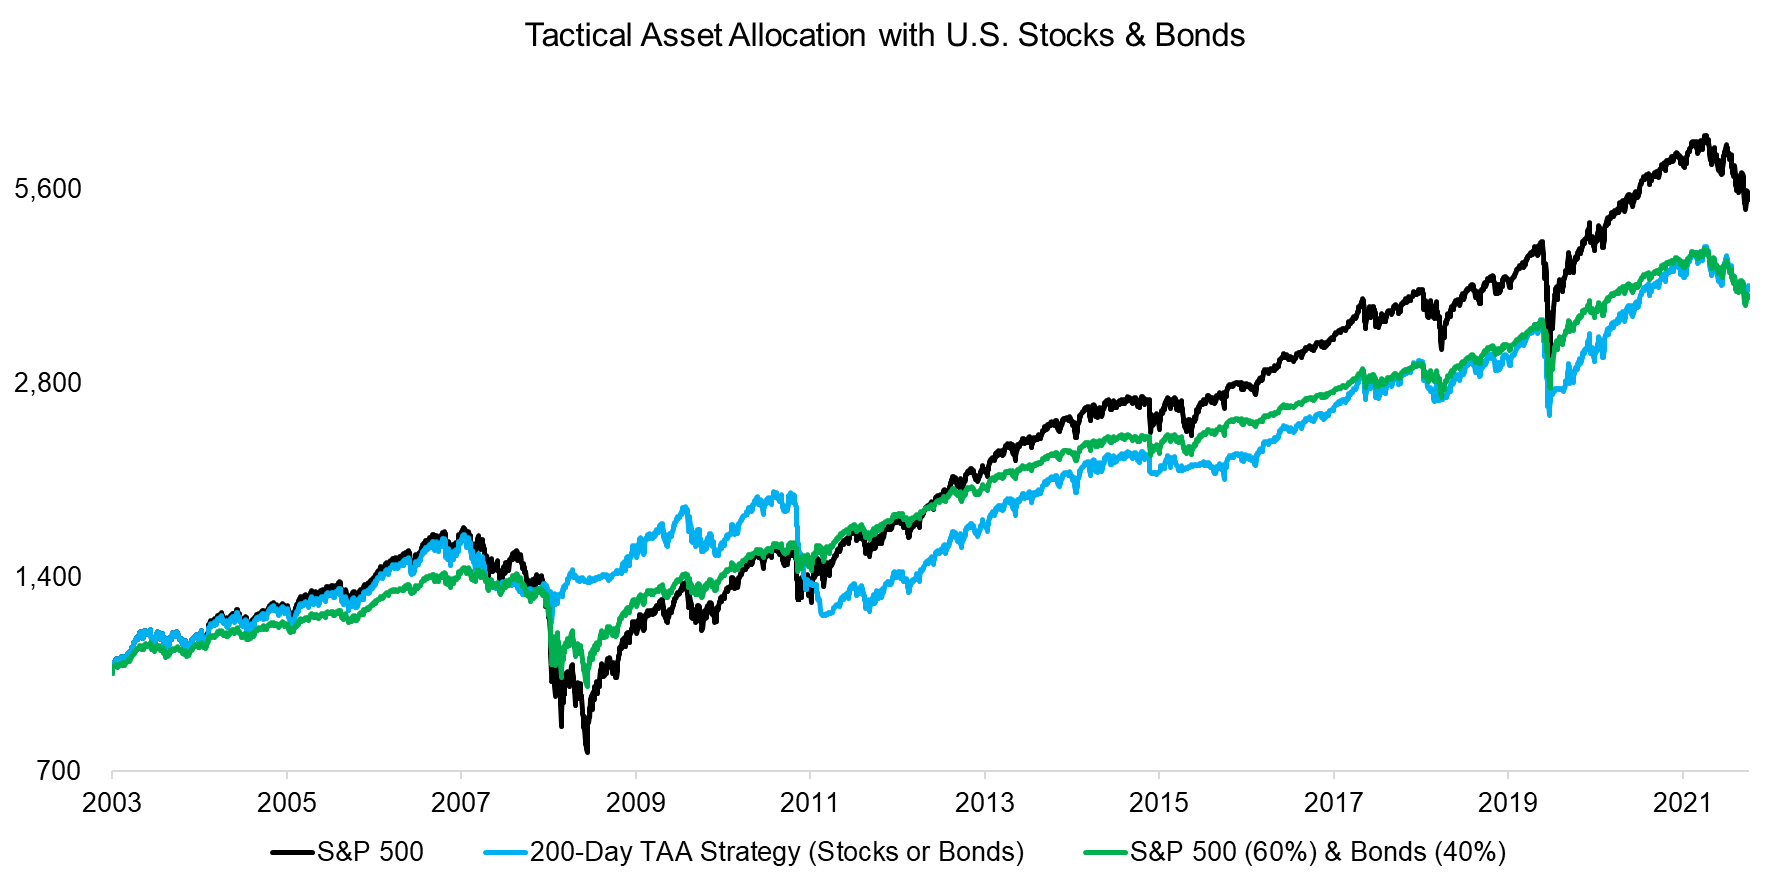 Tactical Asset Allocation with U.S. Stocks & Bonds